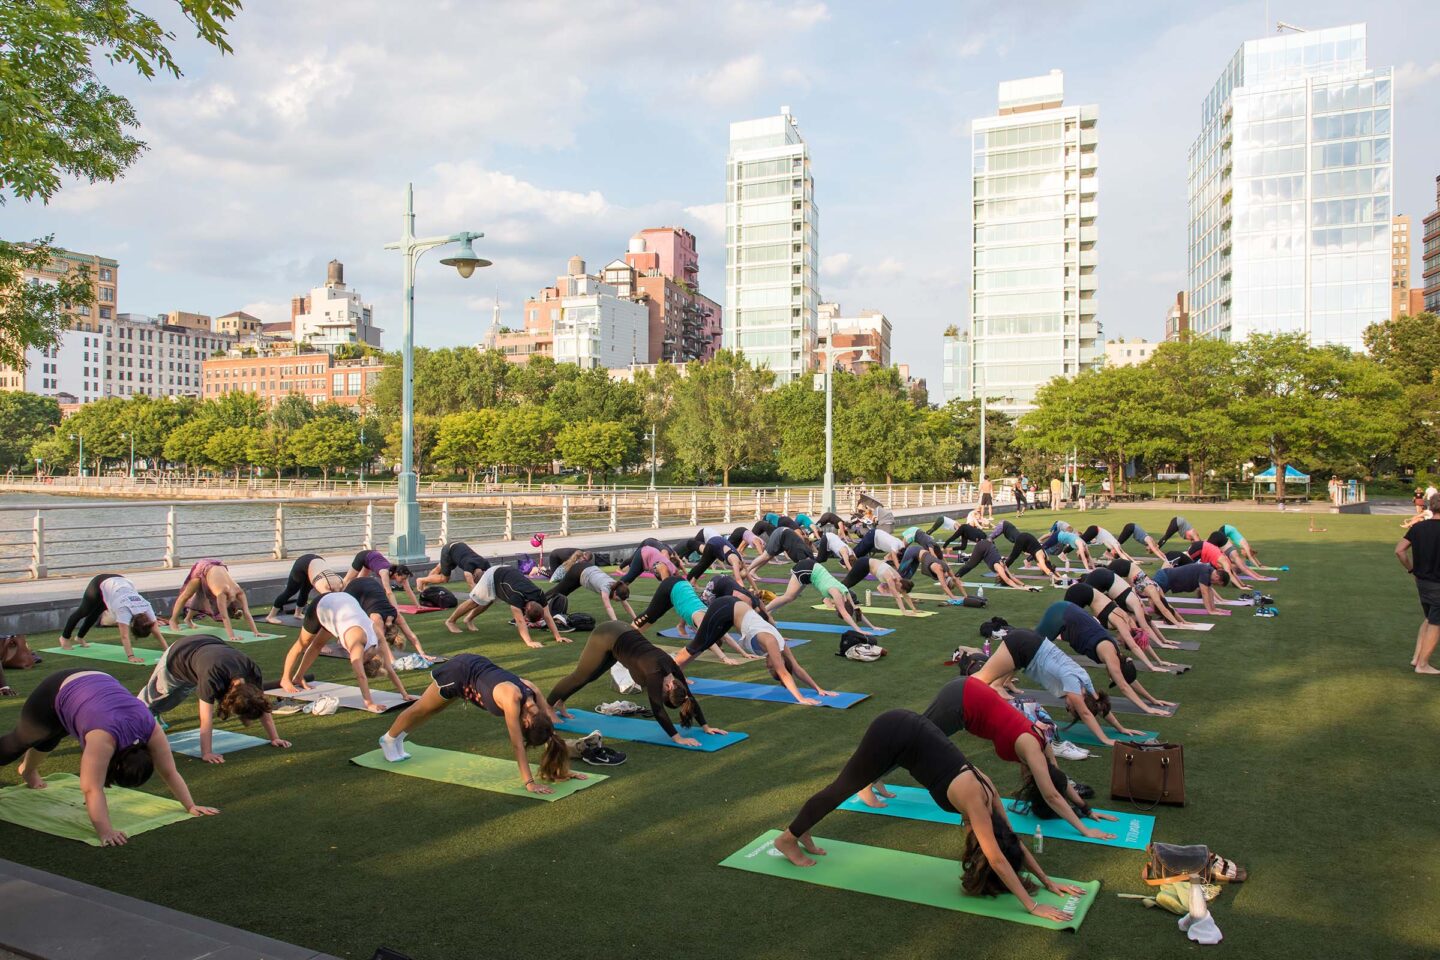 Yoga enthusiasts practice yoga with a downward dog move at Pier 46